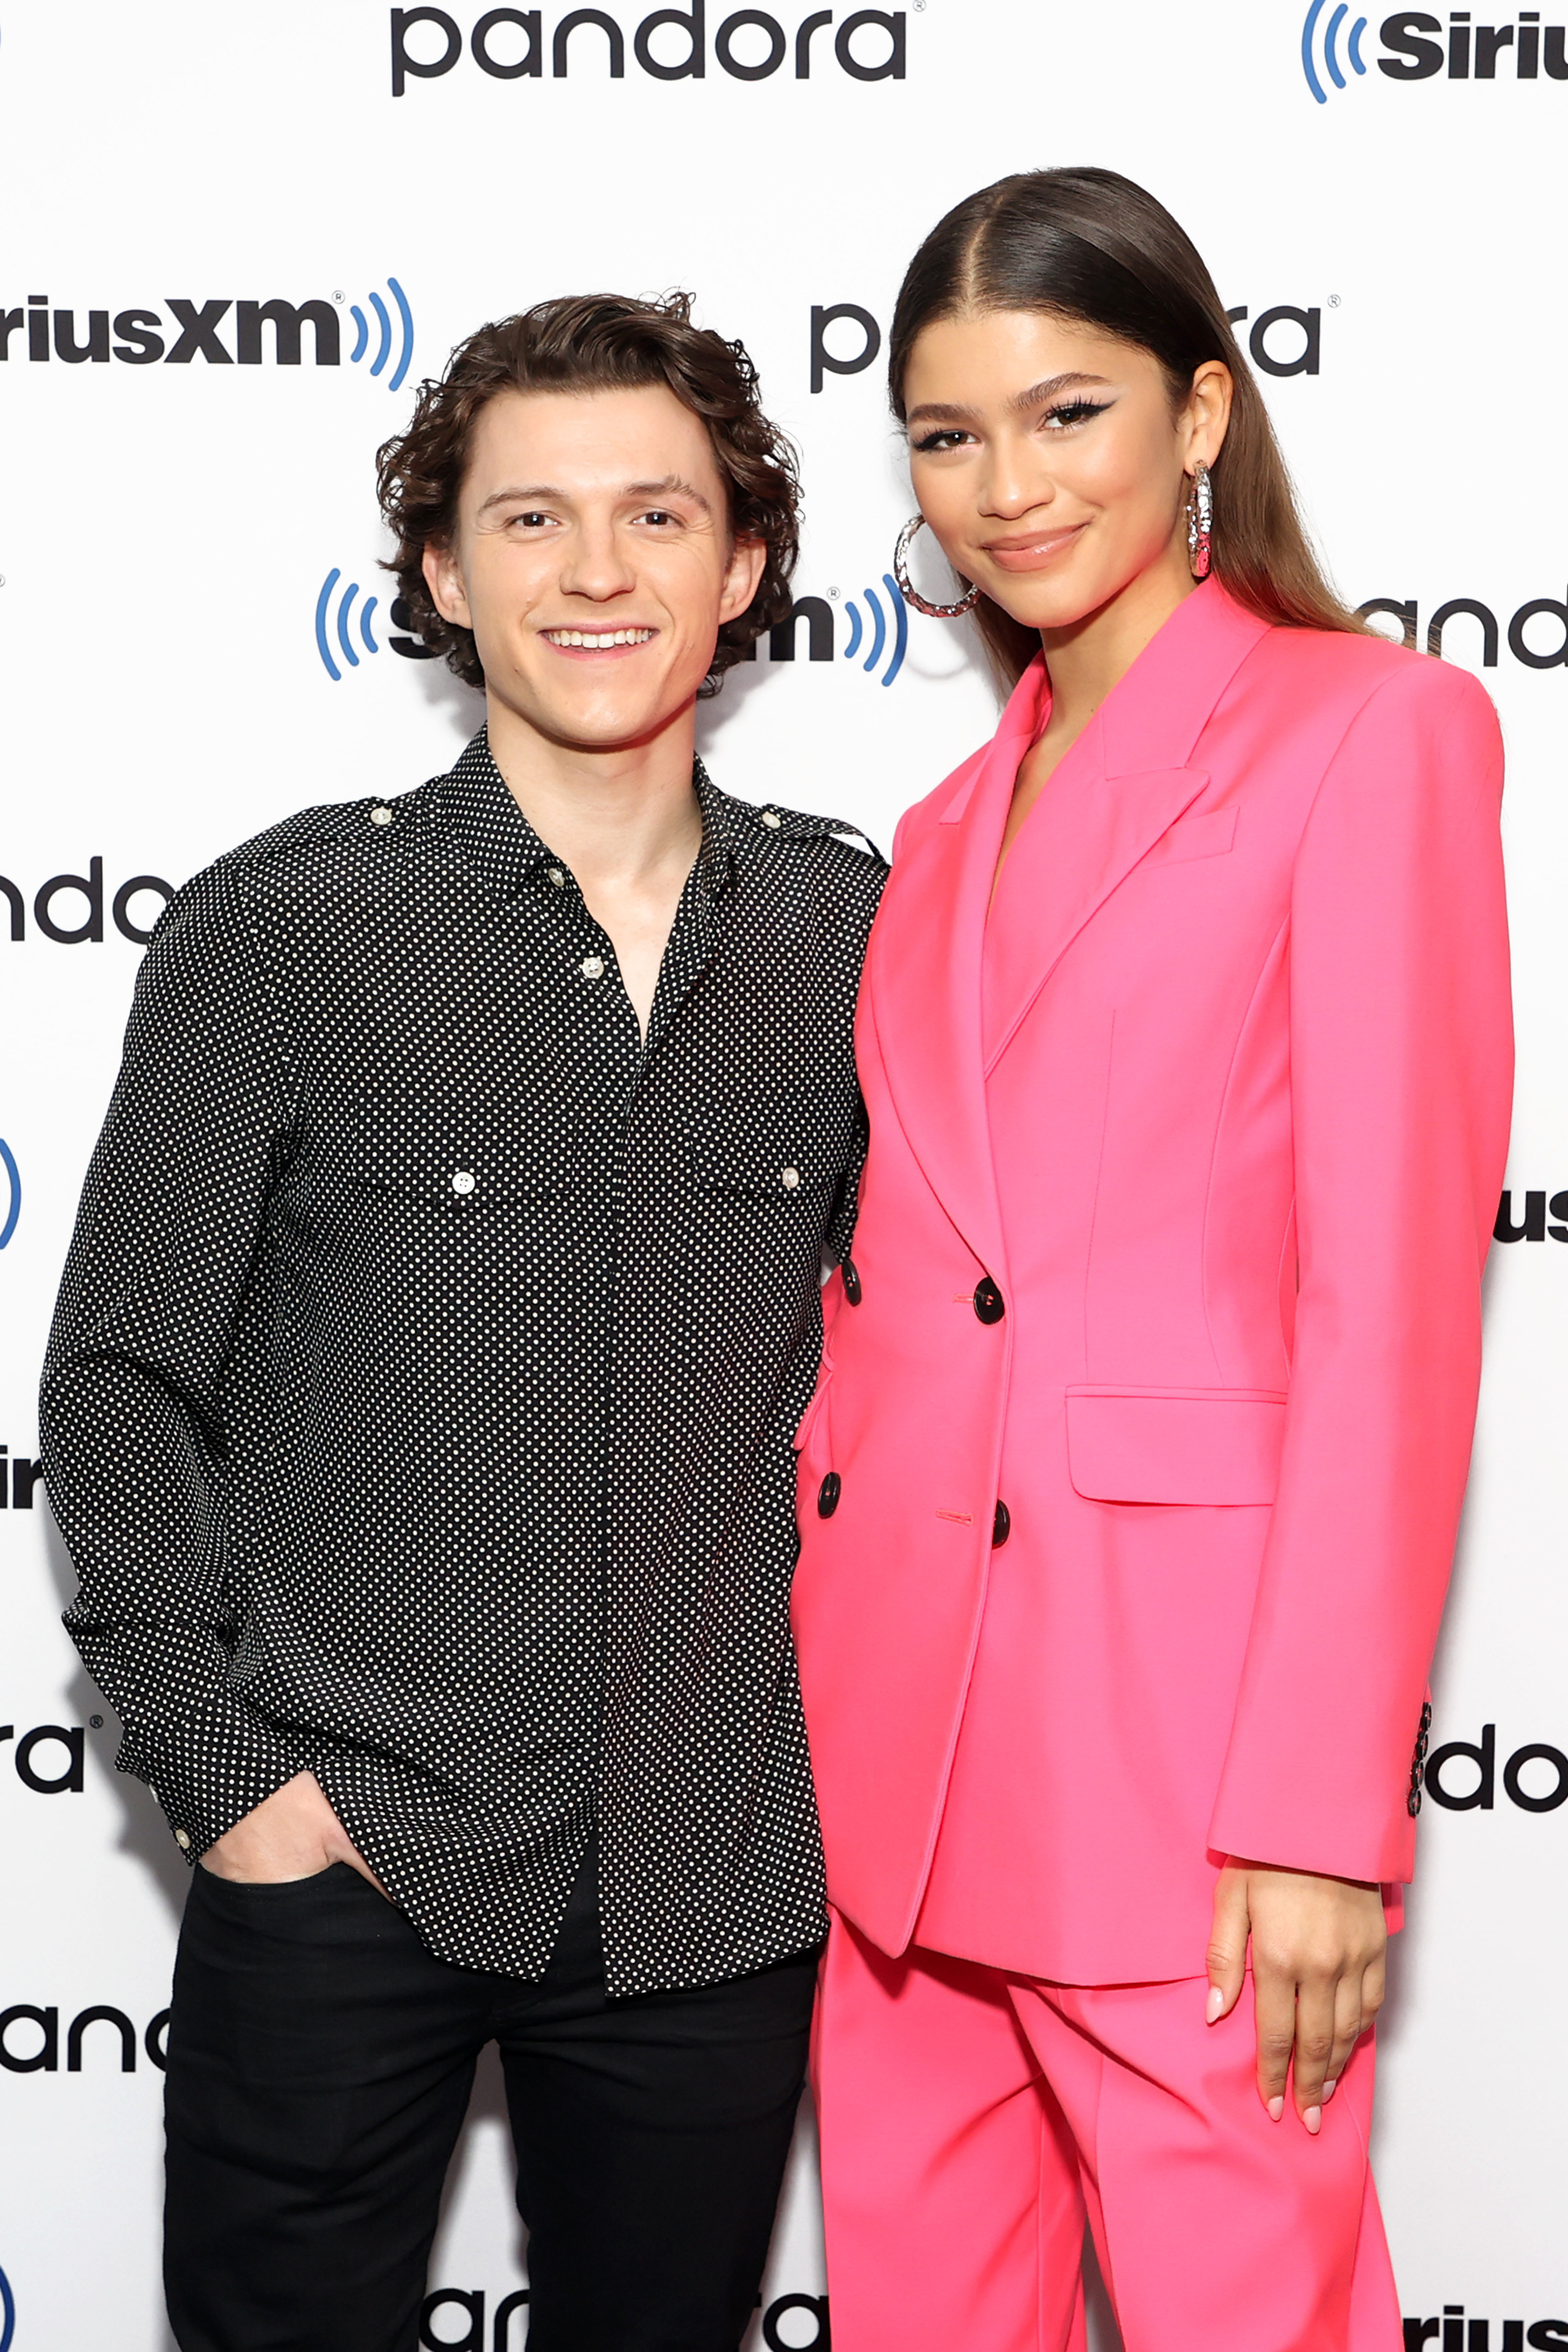 Tom and Zendaya on the red carpet